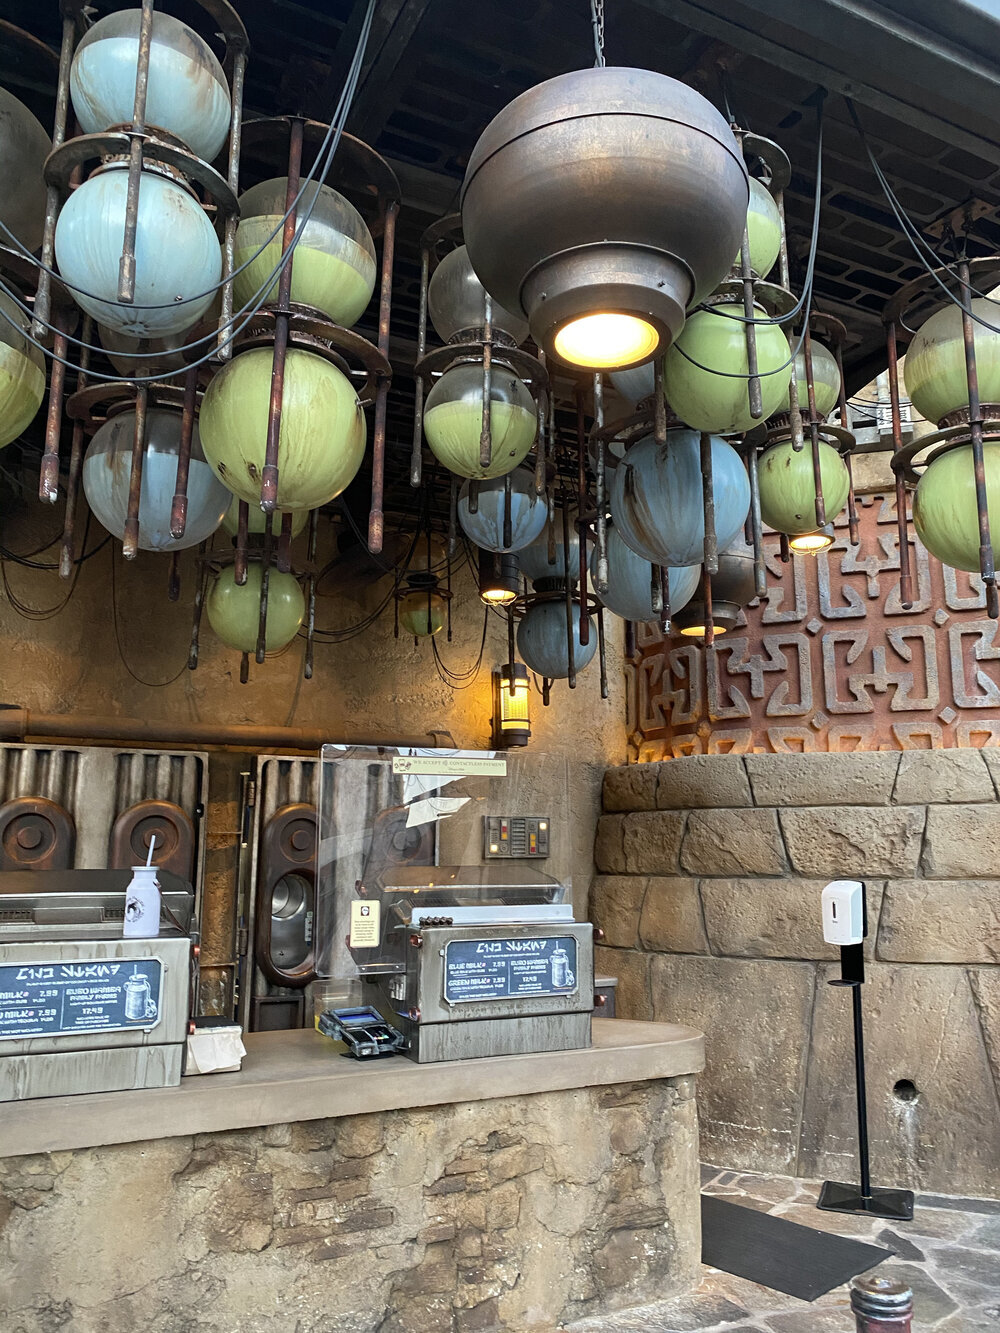 Is the blue and green milk worth it at Star Wars: Galaxy’s Edge at Disney World